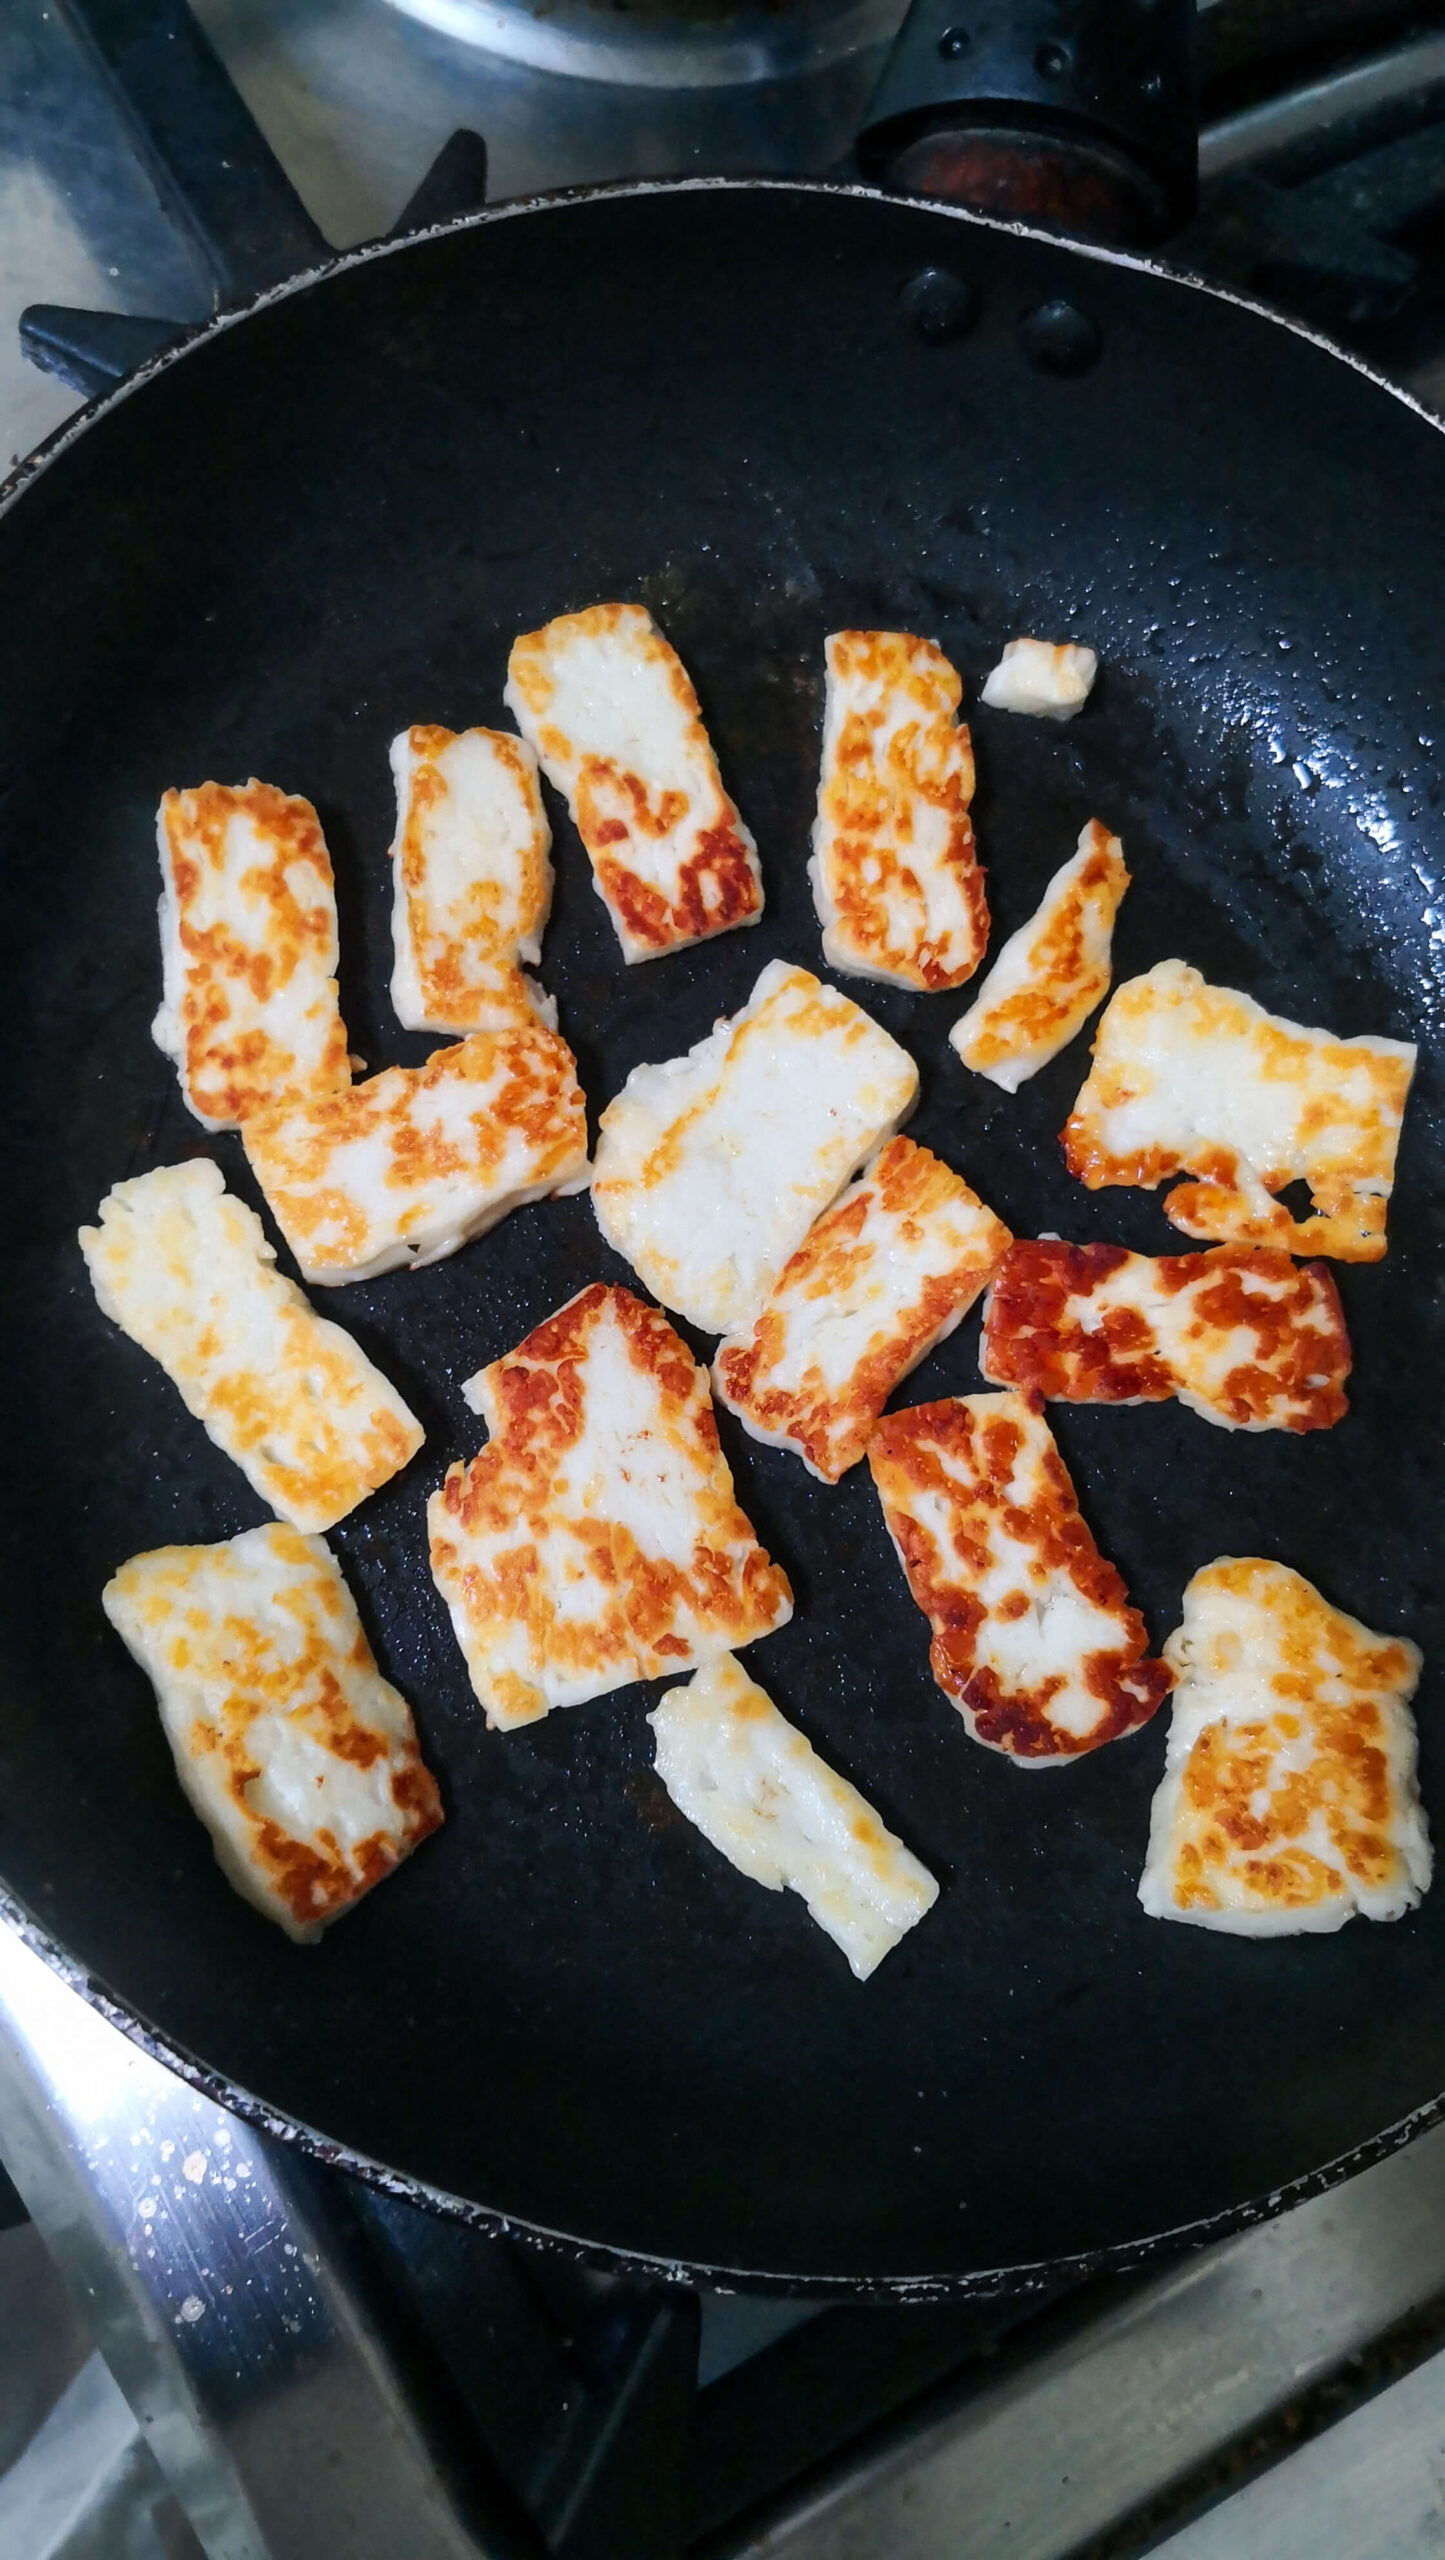 Golden halloumi cooking in a small black pan.